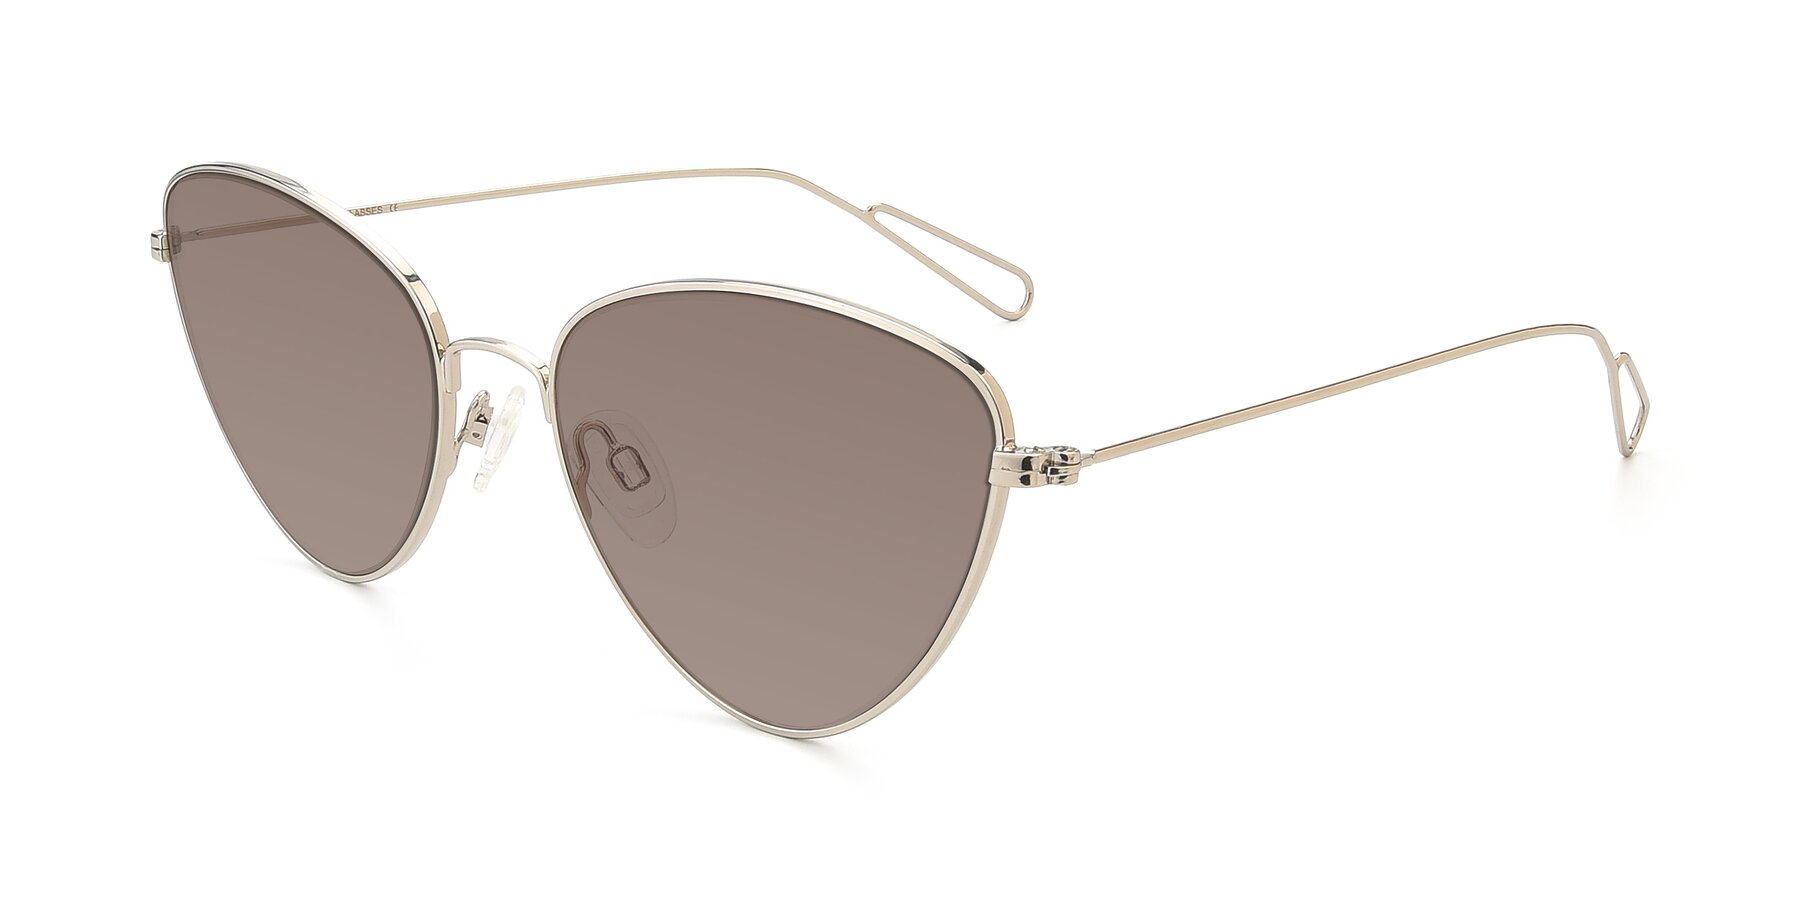 Angle of Butterfly Effect in Silver with Medium Brown Tinted Lenses